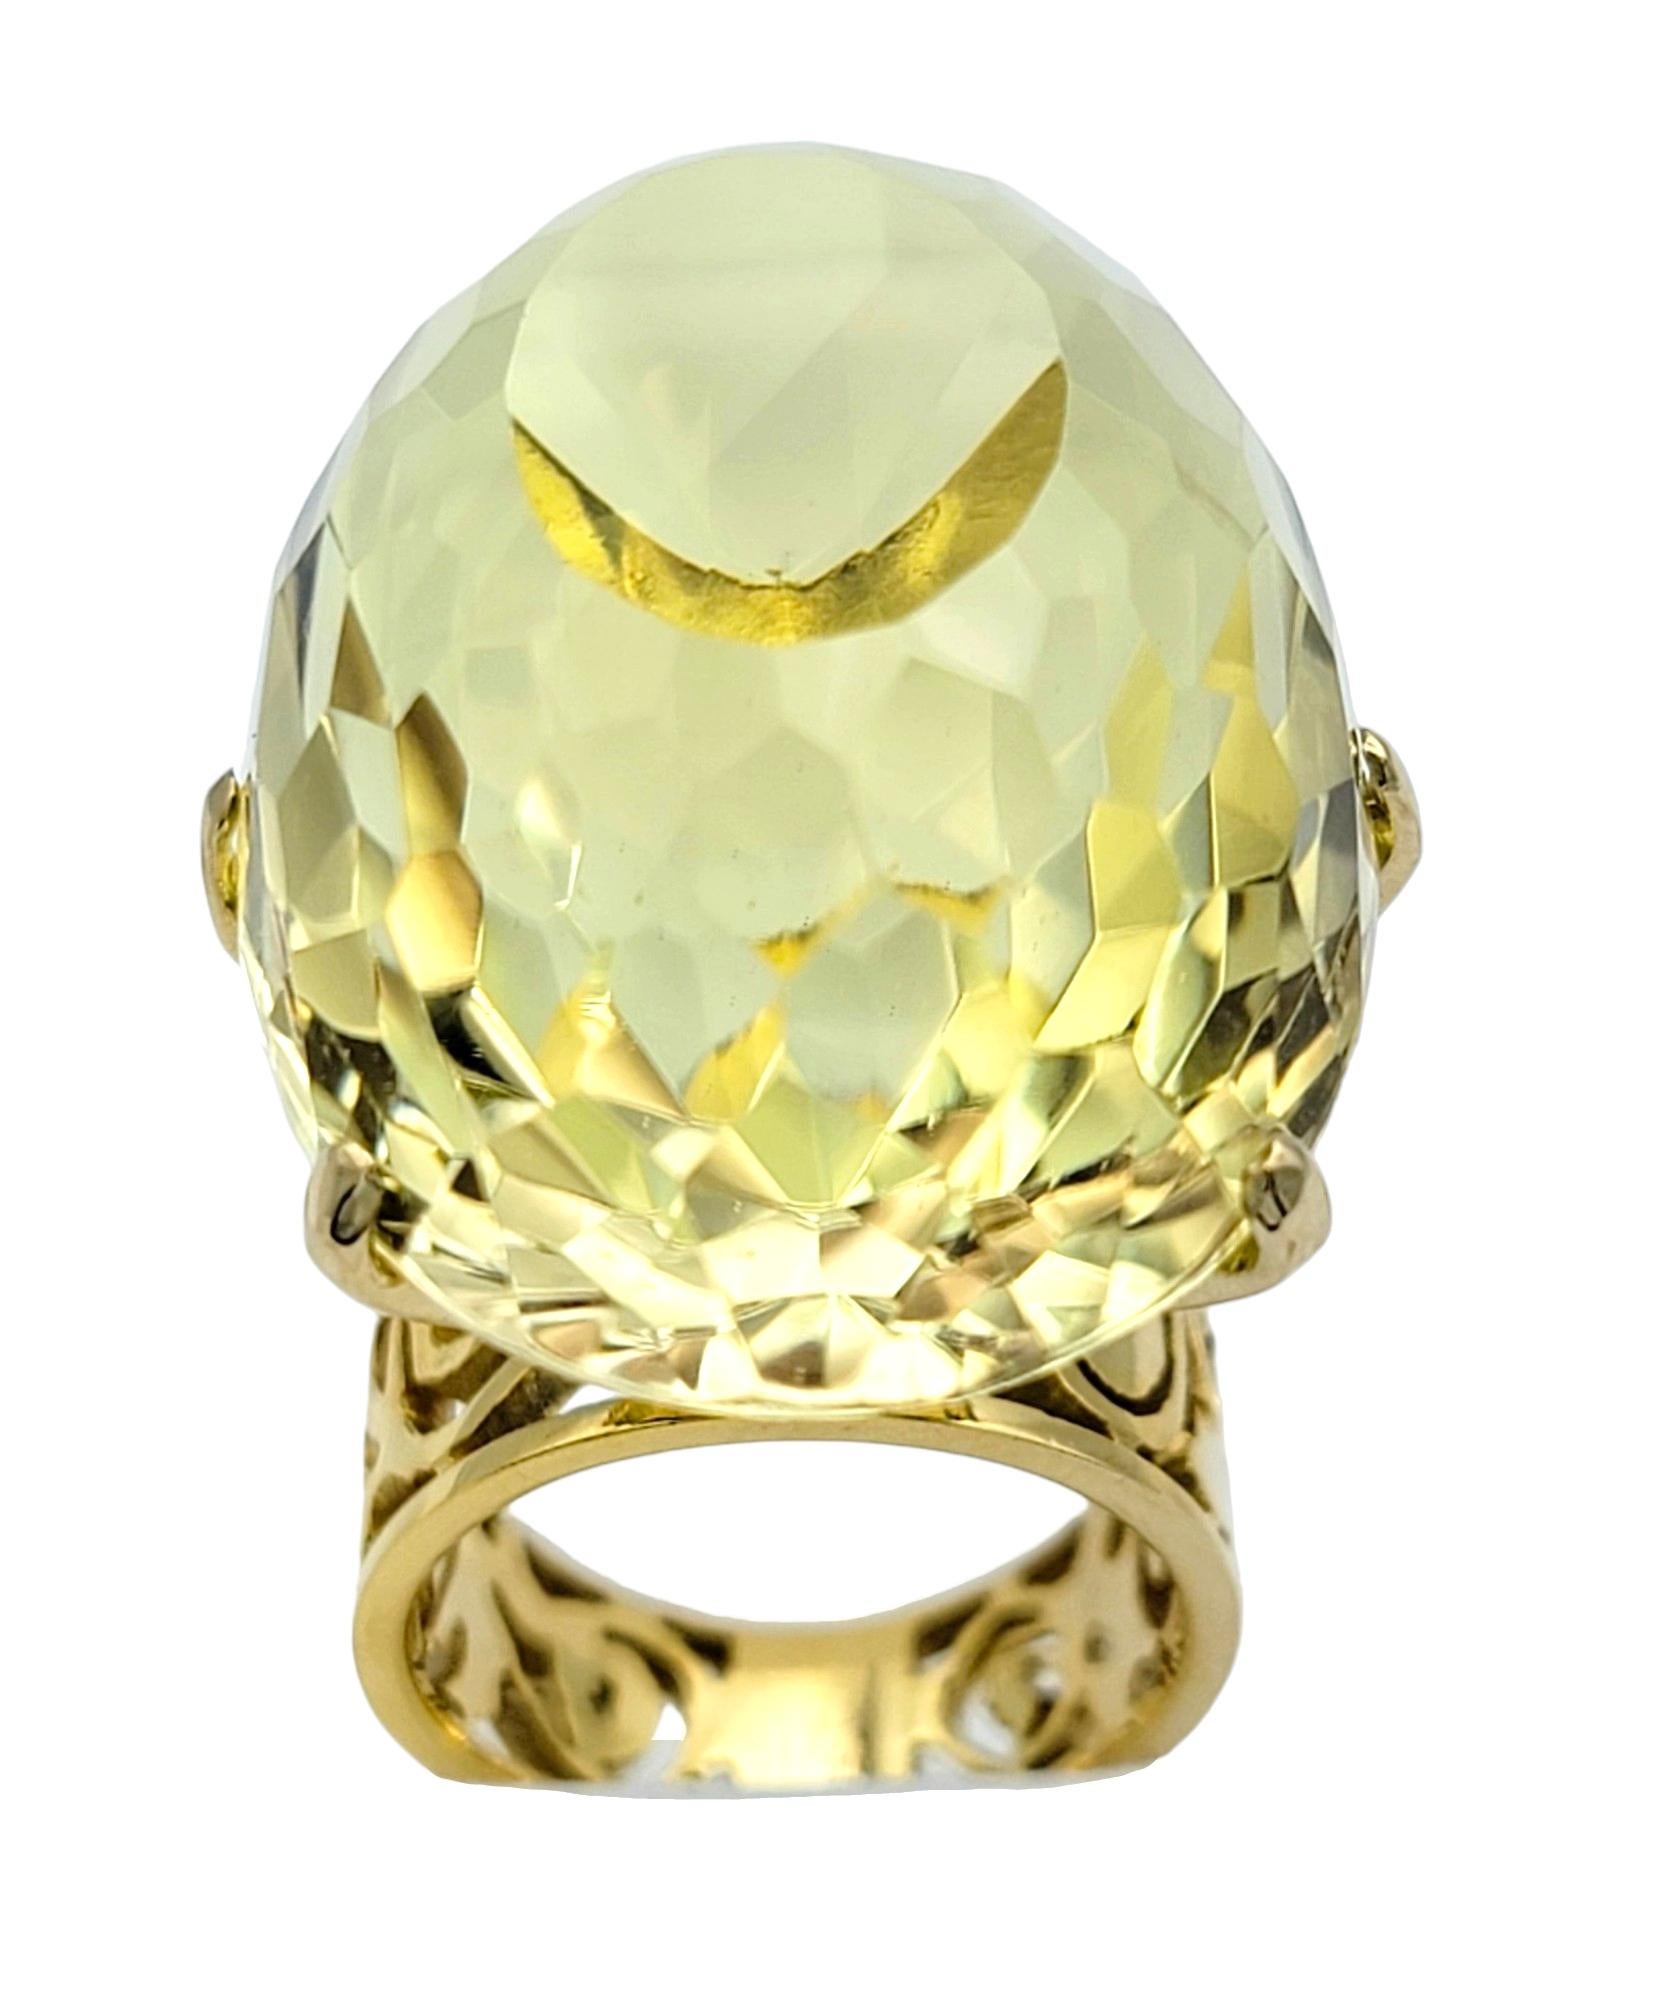 Contemporary 77.08 Carat Oval Citrine High Profile Cocktail Ring Set in 14 Karat Yellow Gold For Sale